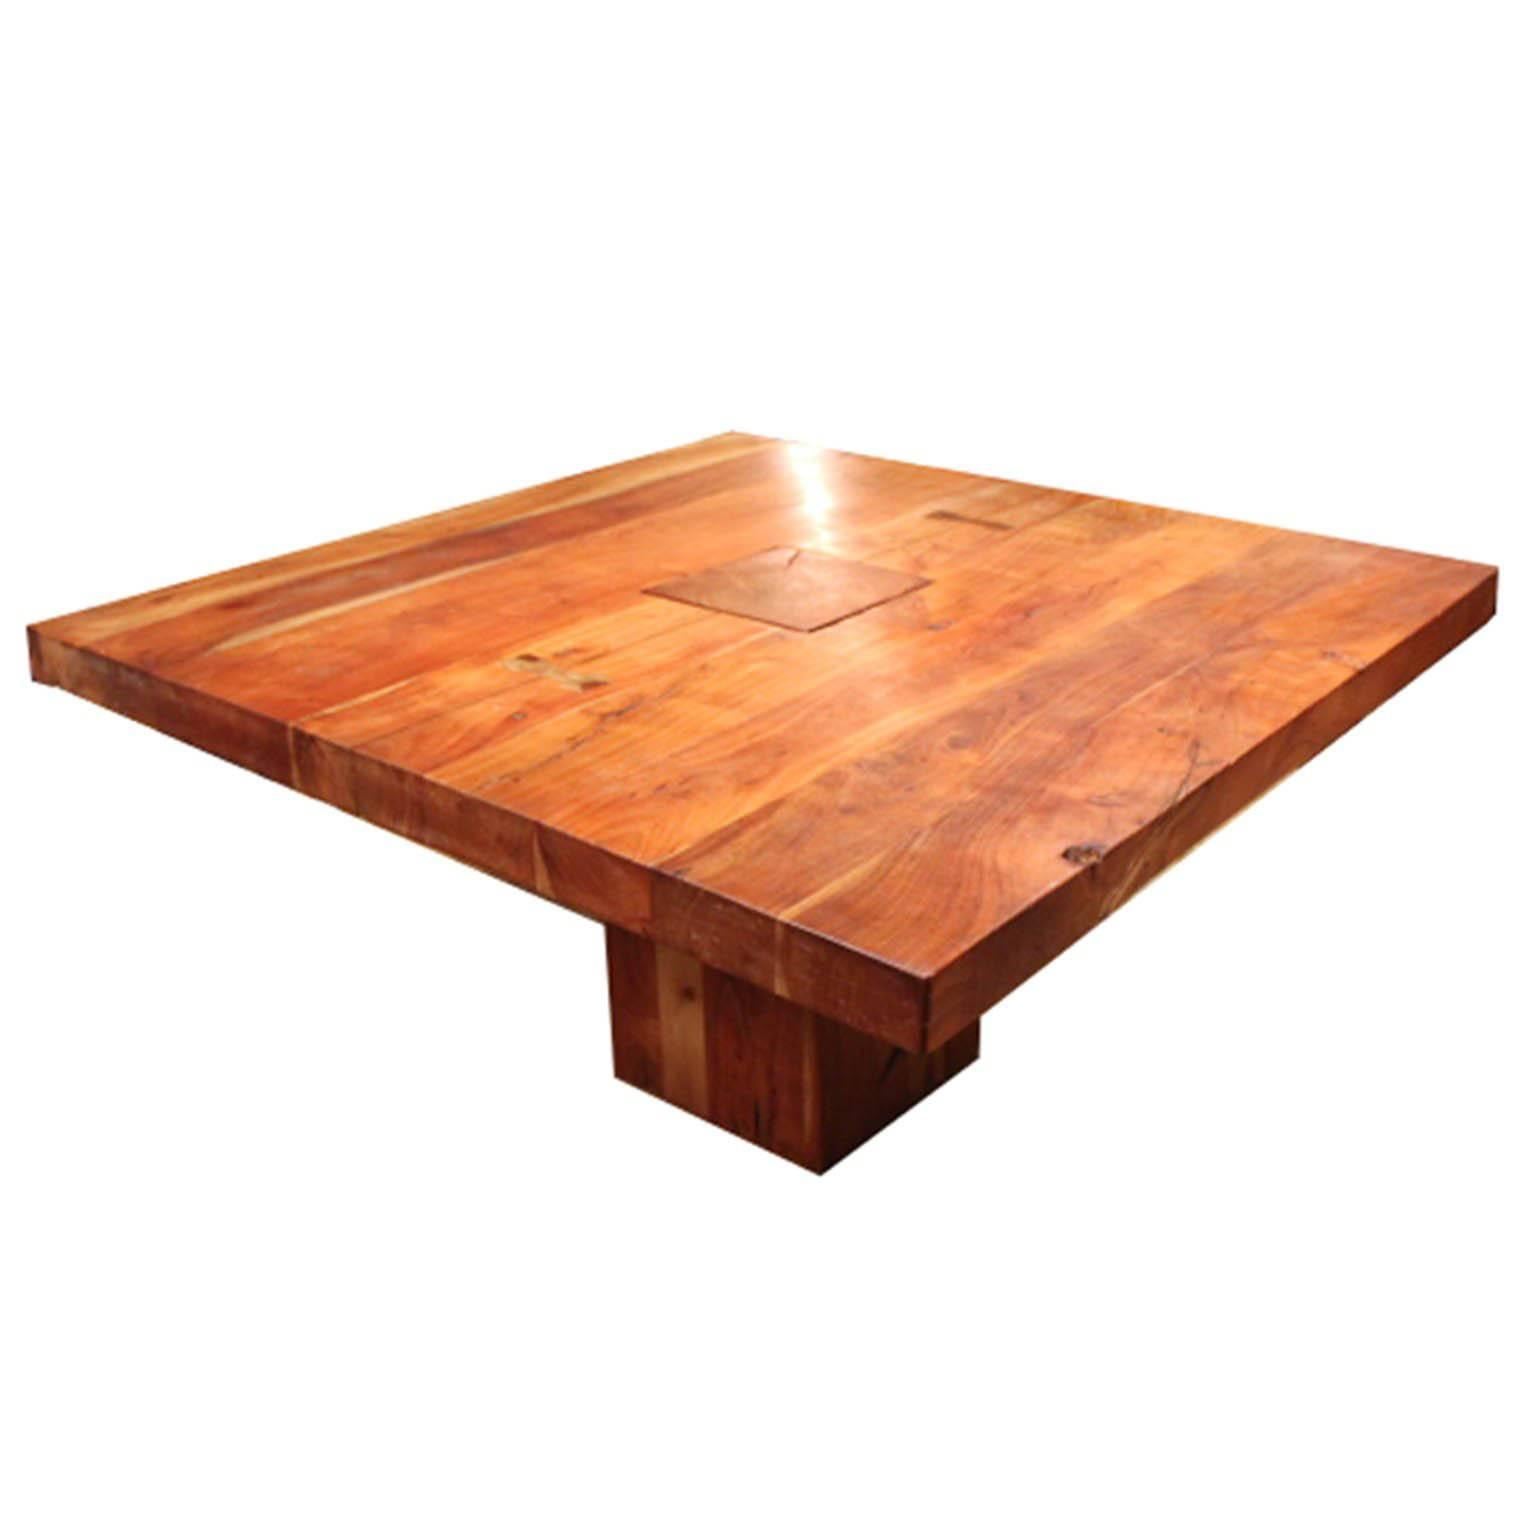 Custom Solid Cherry Dining Table with Walnut Butterfly Joints